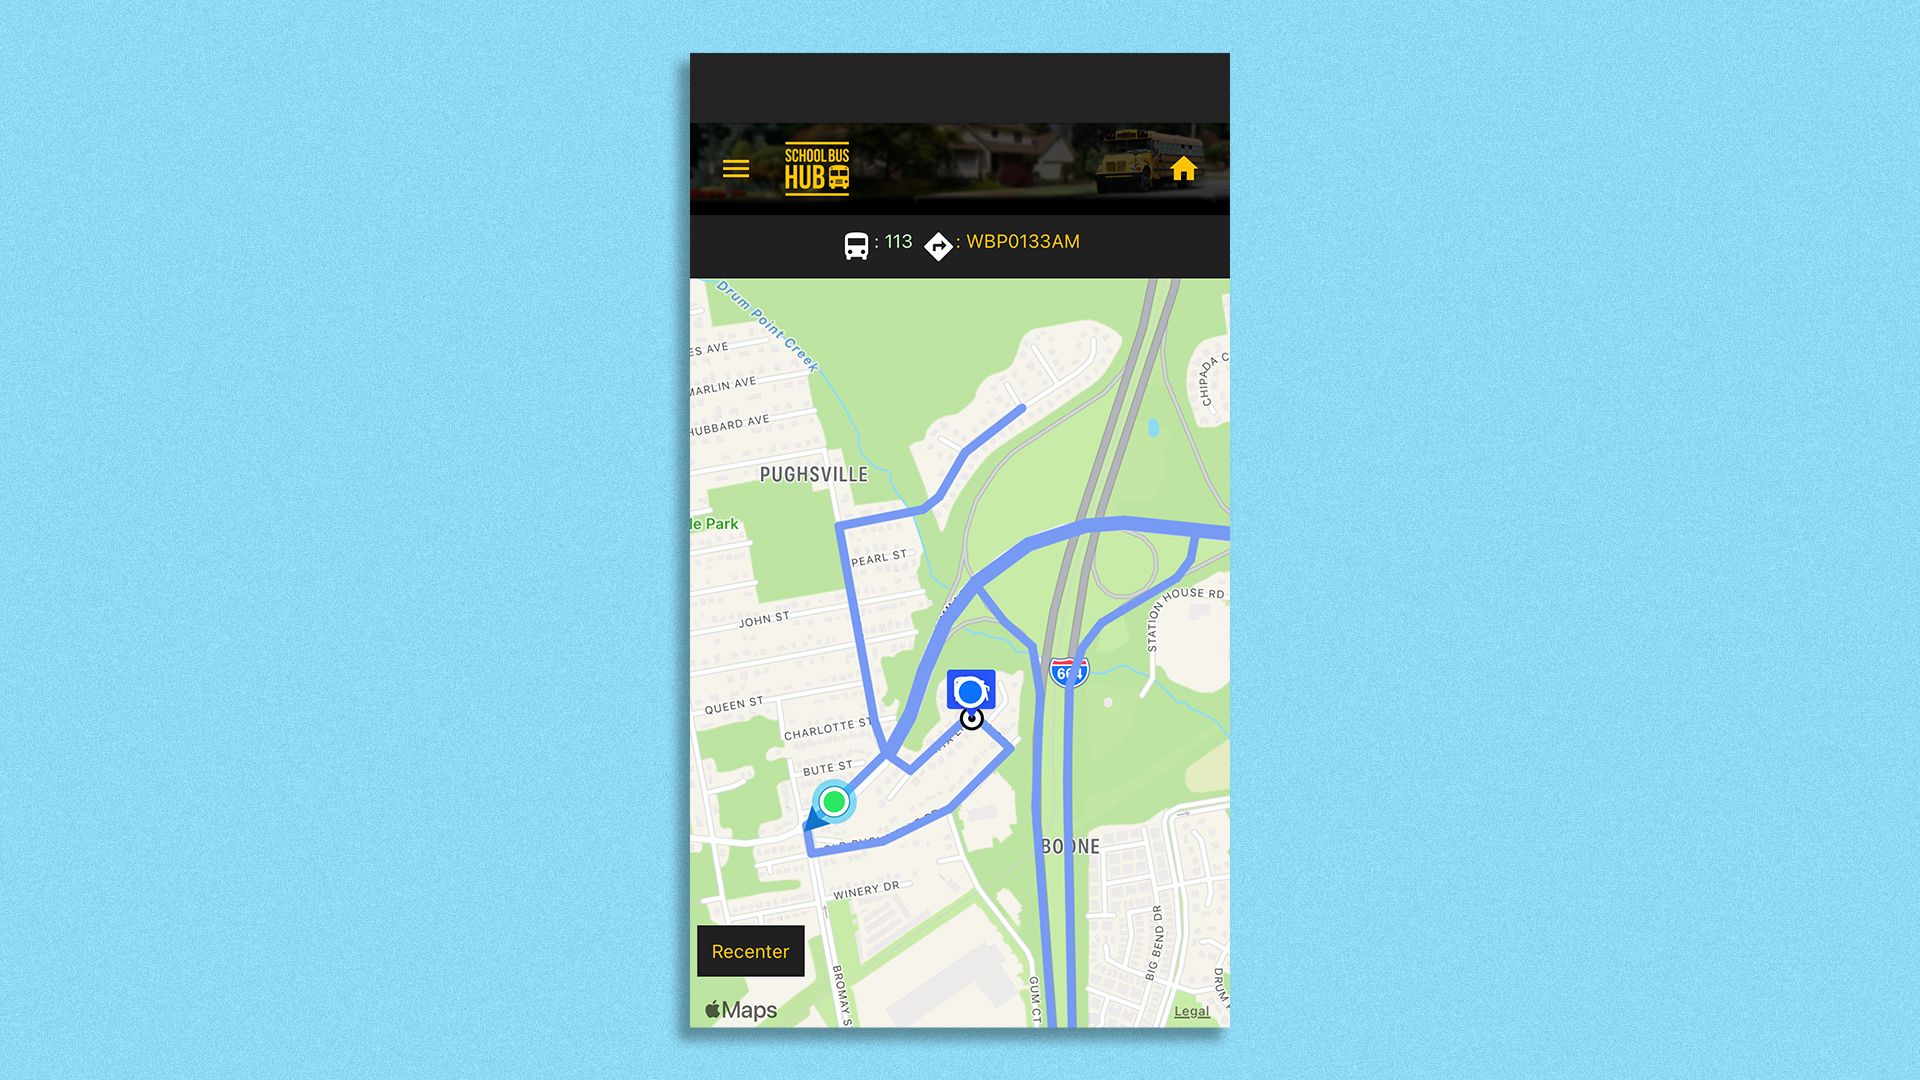 A screen showing a map of a student's ride on a school bus.